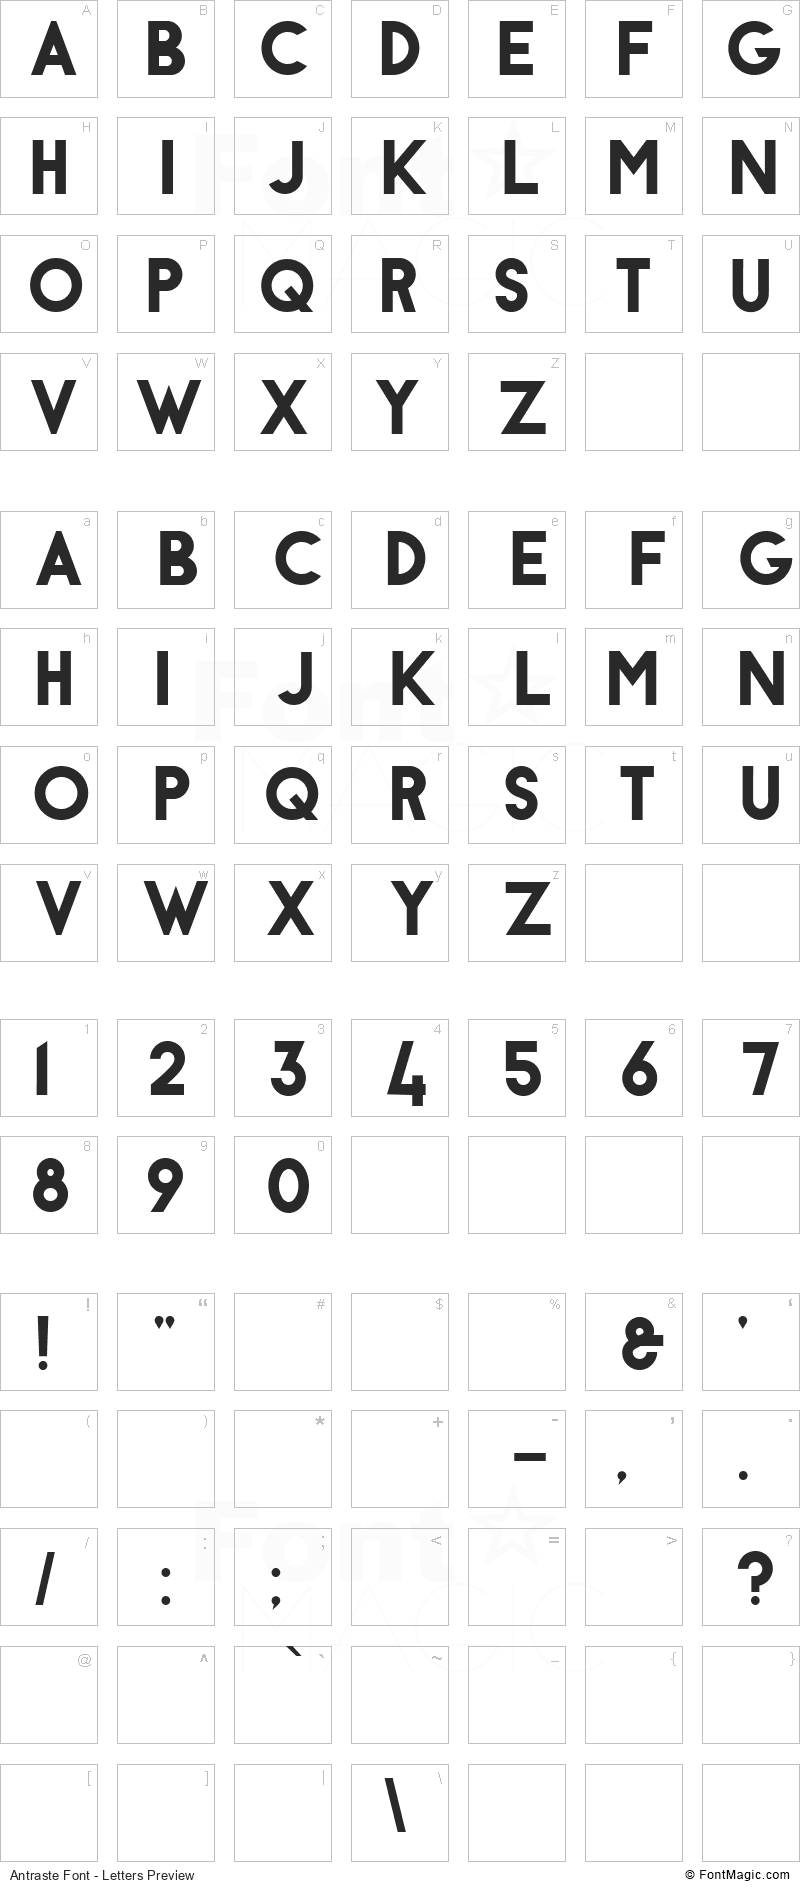 Antraste Font - All Latters Preview Chart